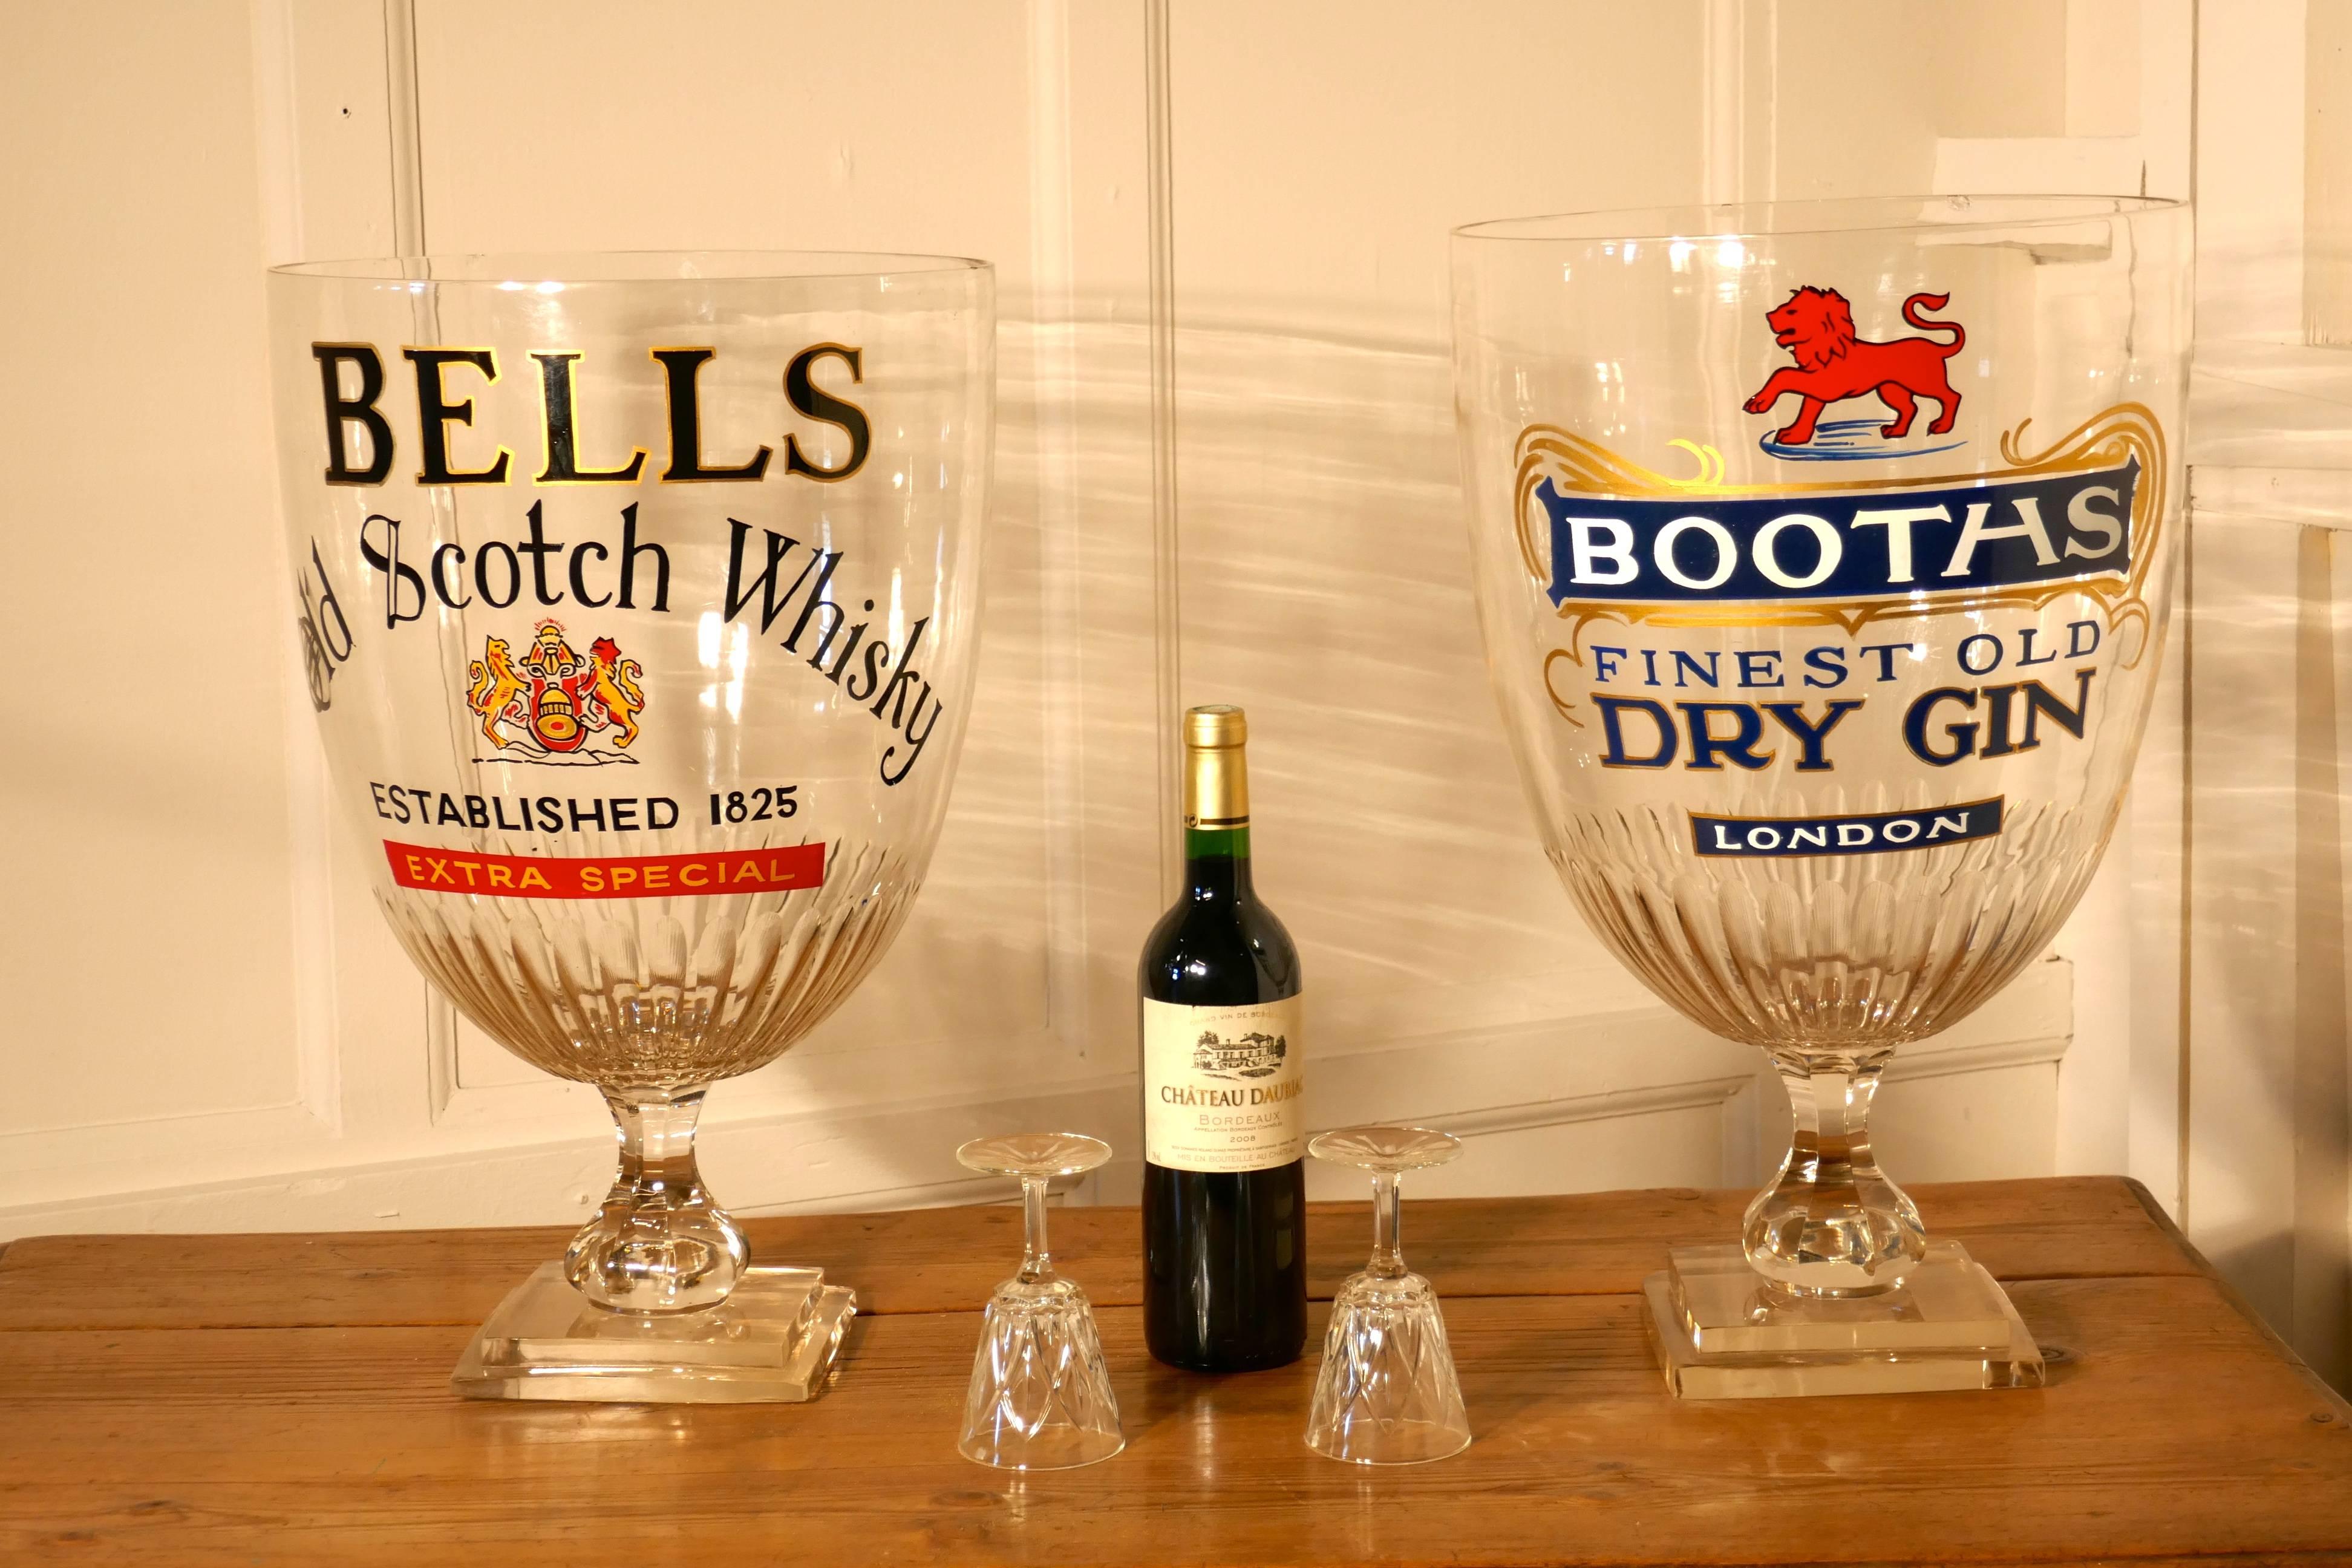 Huge bar chalice, Victorian advertising bells scotch whisky


This is an oversized glass, made for Pub or Bar display advertising. 
The glass stands on a thick stepped square base, it has a fluted bowl and is 20” high
It is advertising Bells